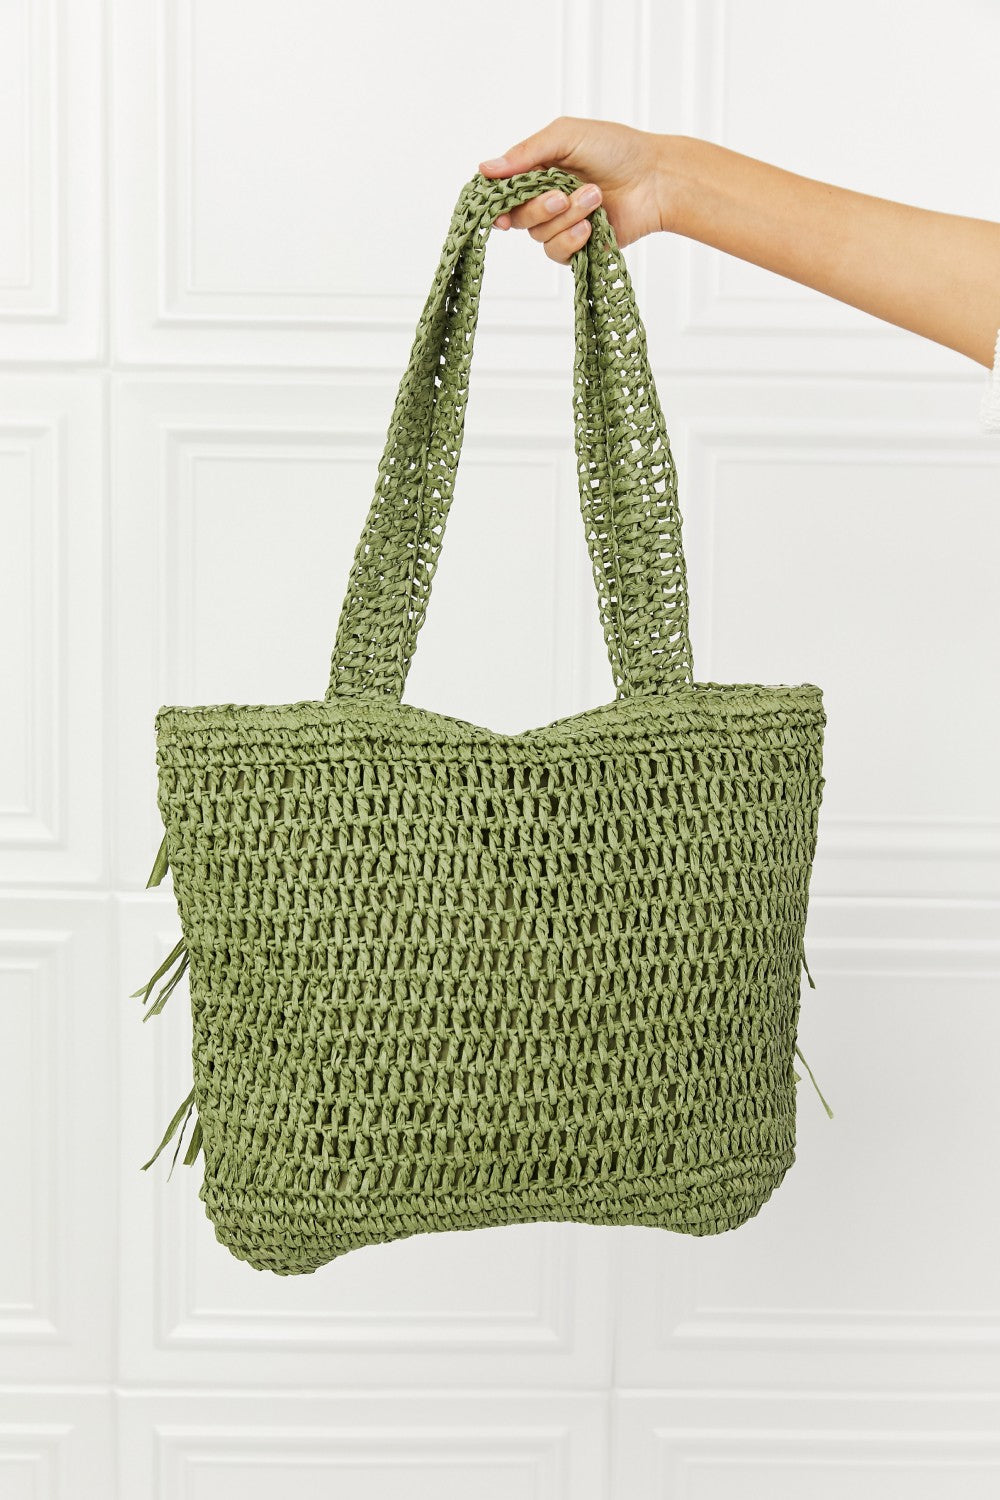 Fame The Last Straw Fringe Straw Tote Bag - Ships from The US - Tote bags at TFC&H Co.